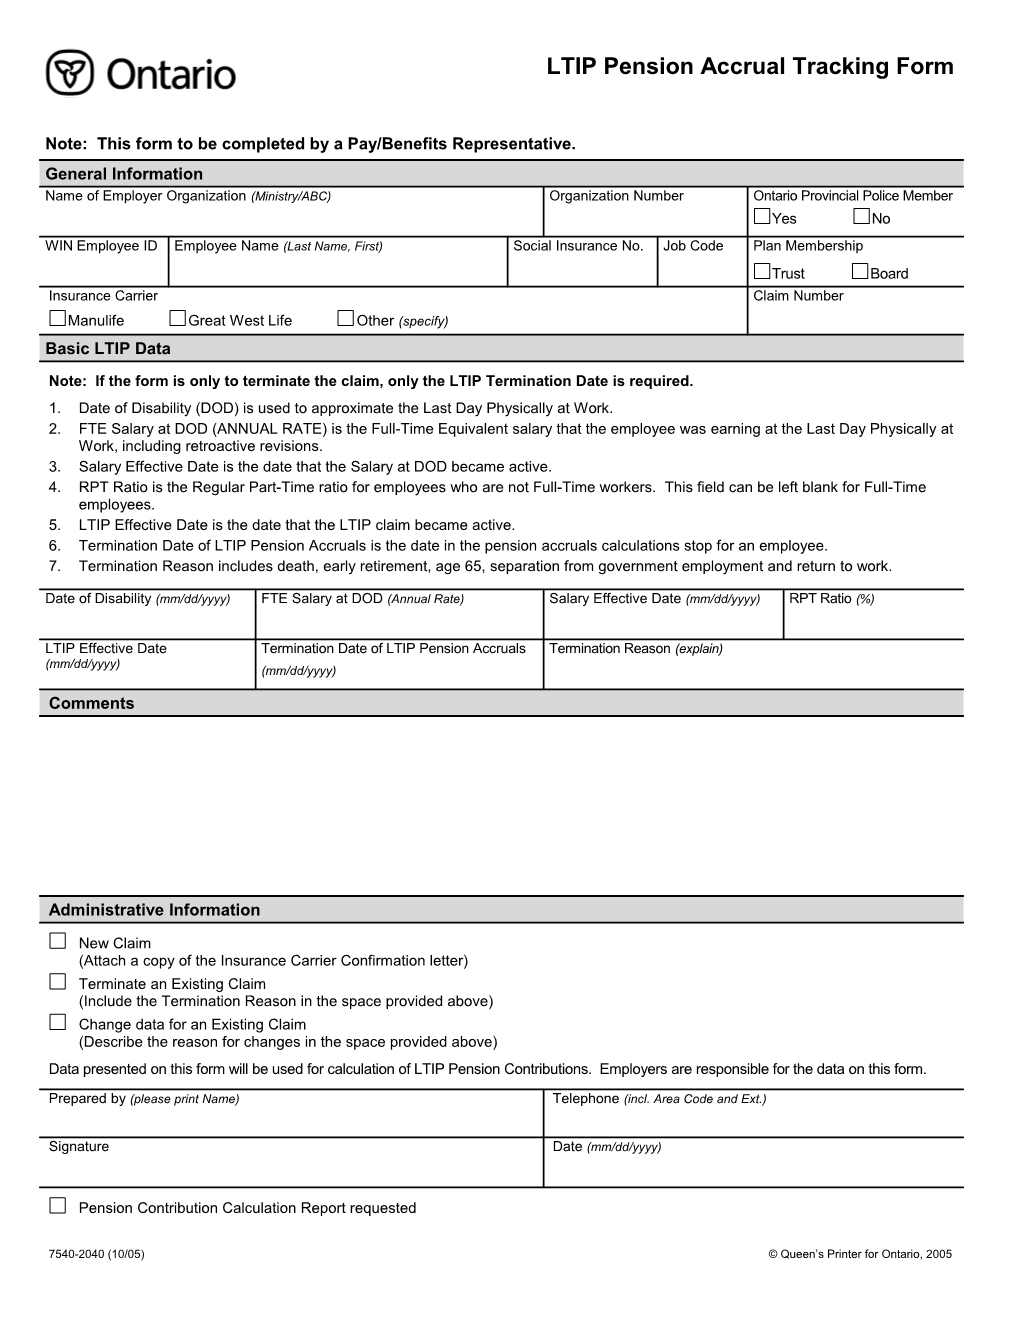 LTIP Pension Accrual Tracking Form